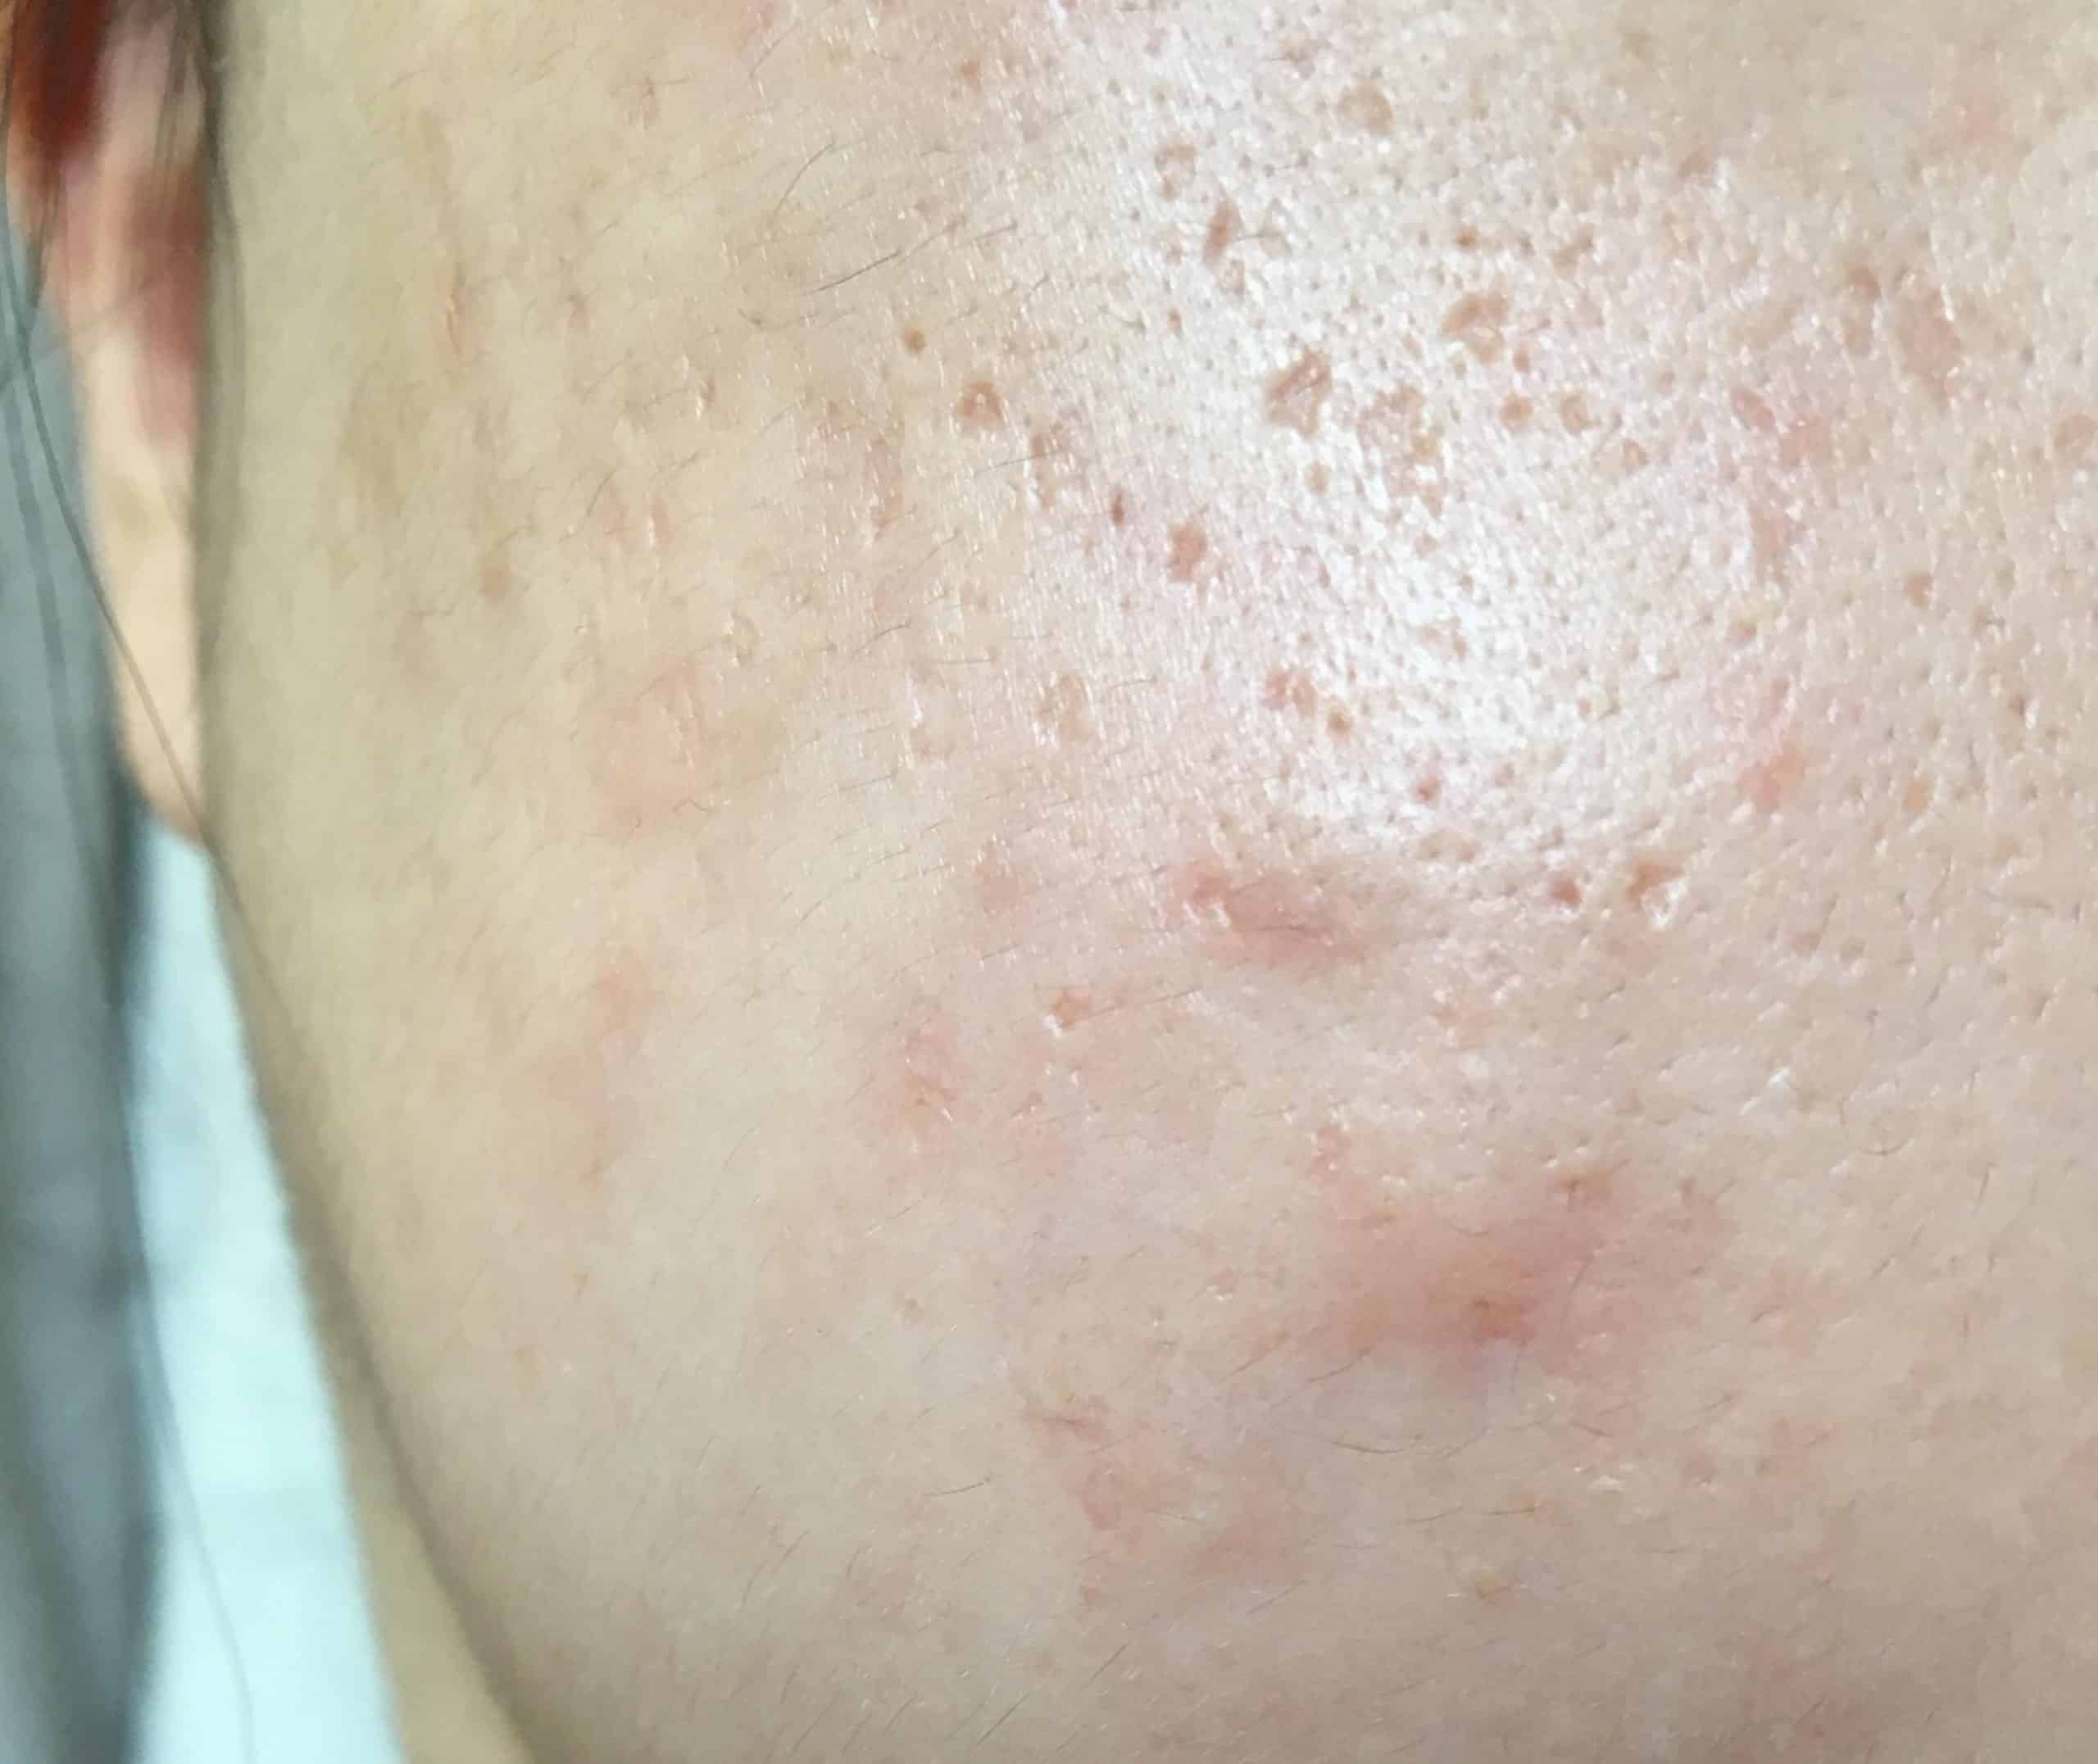 [acne] What to do about these huge under the skin bumps (Cyst? Nodule ...